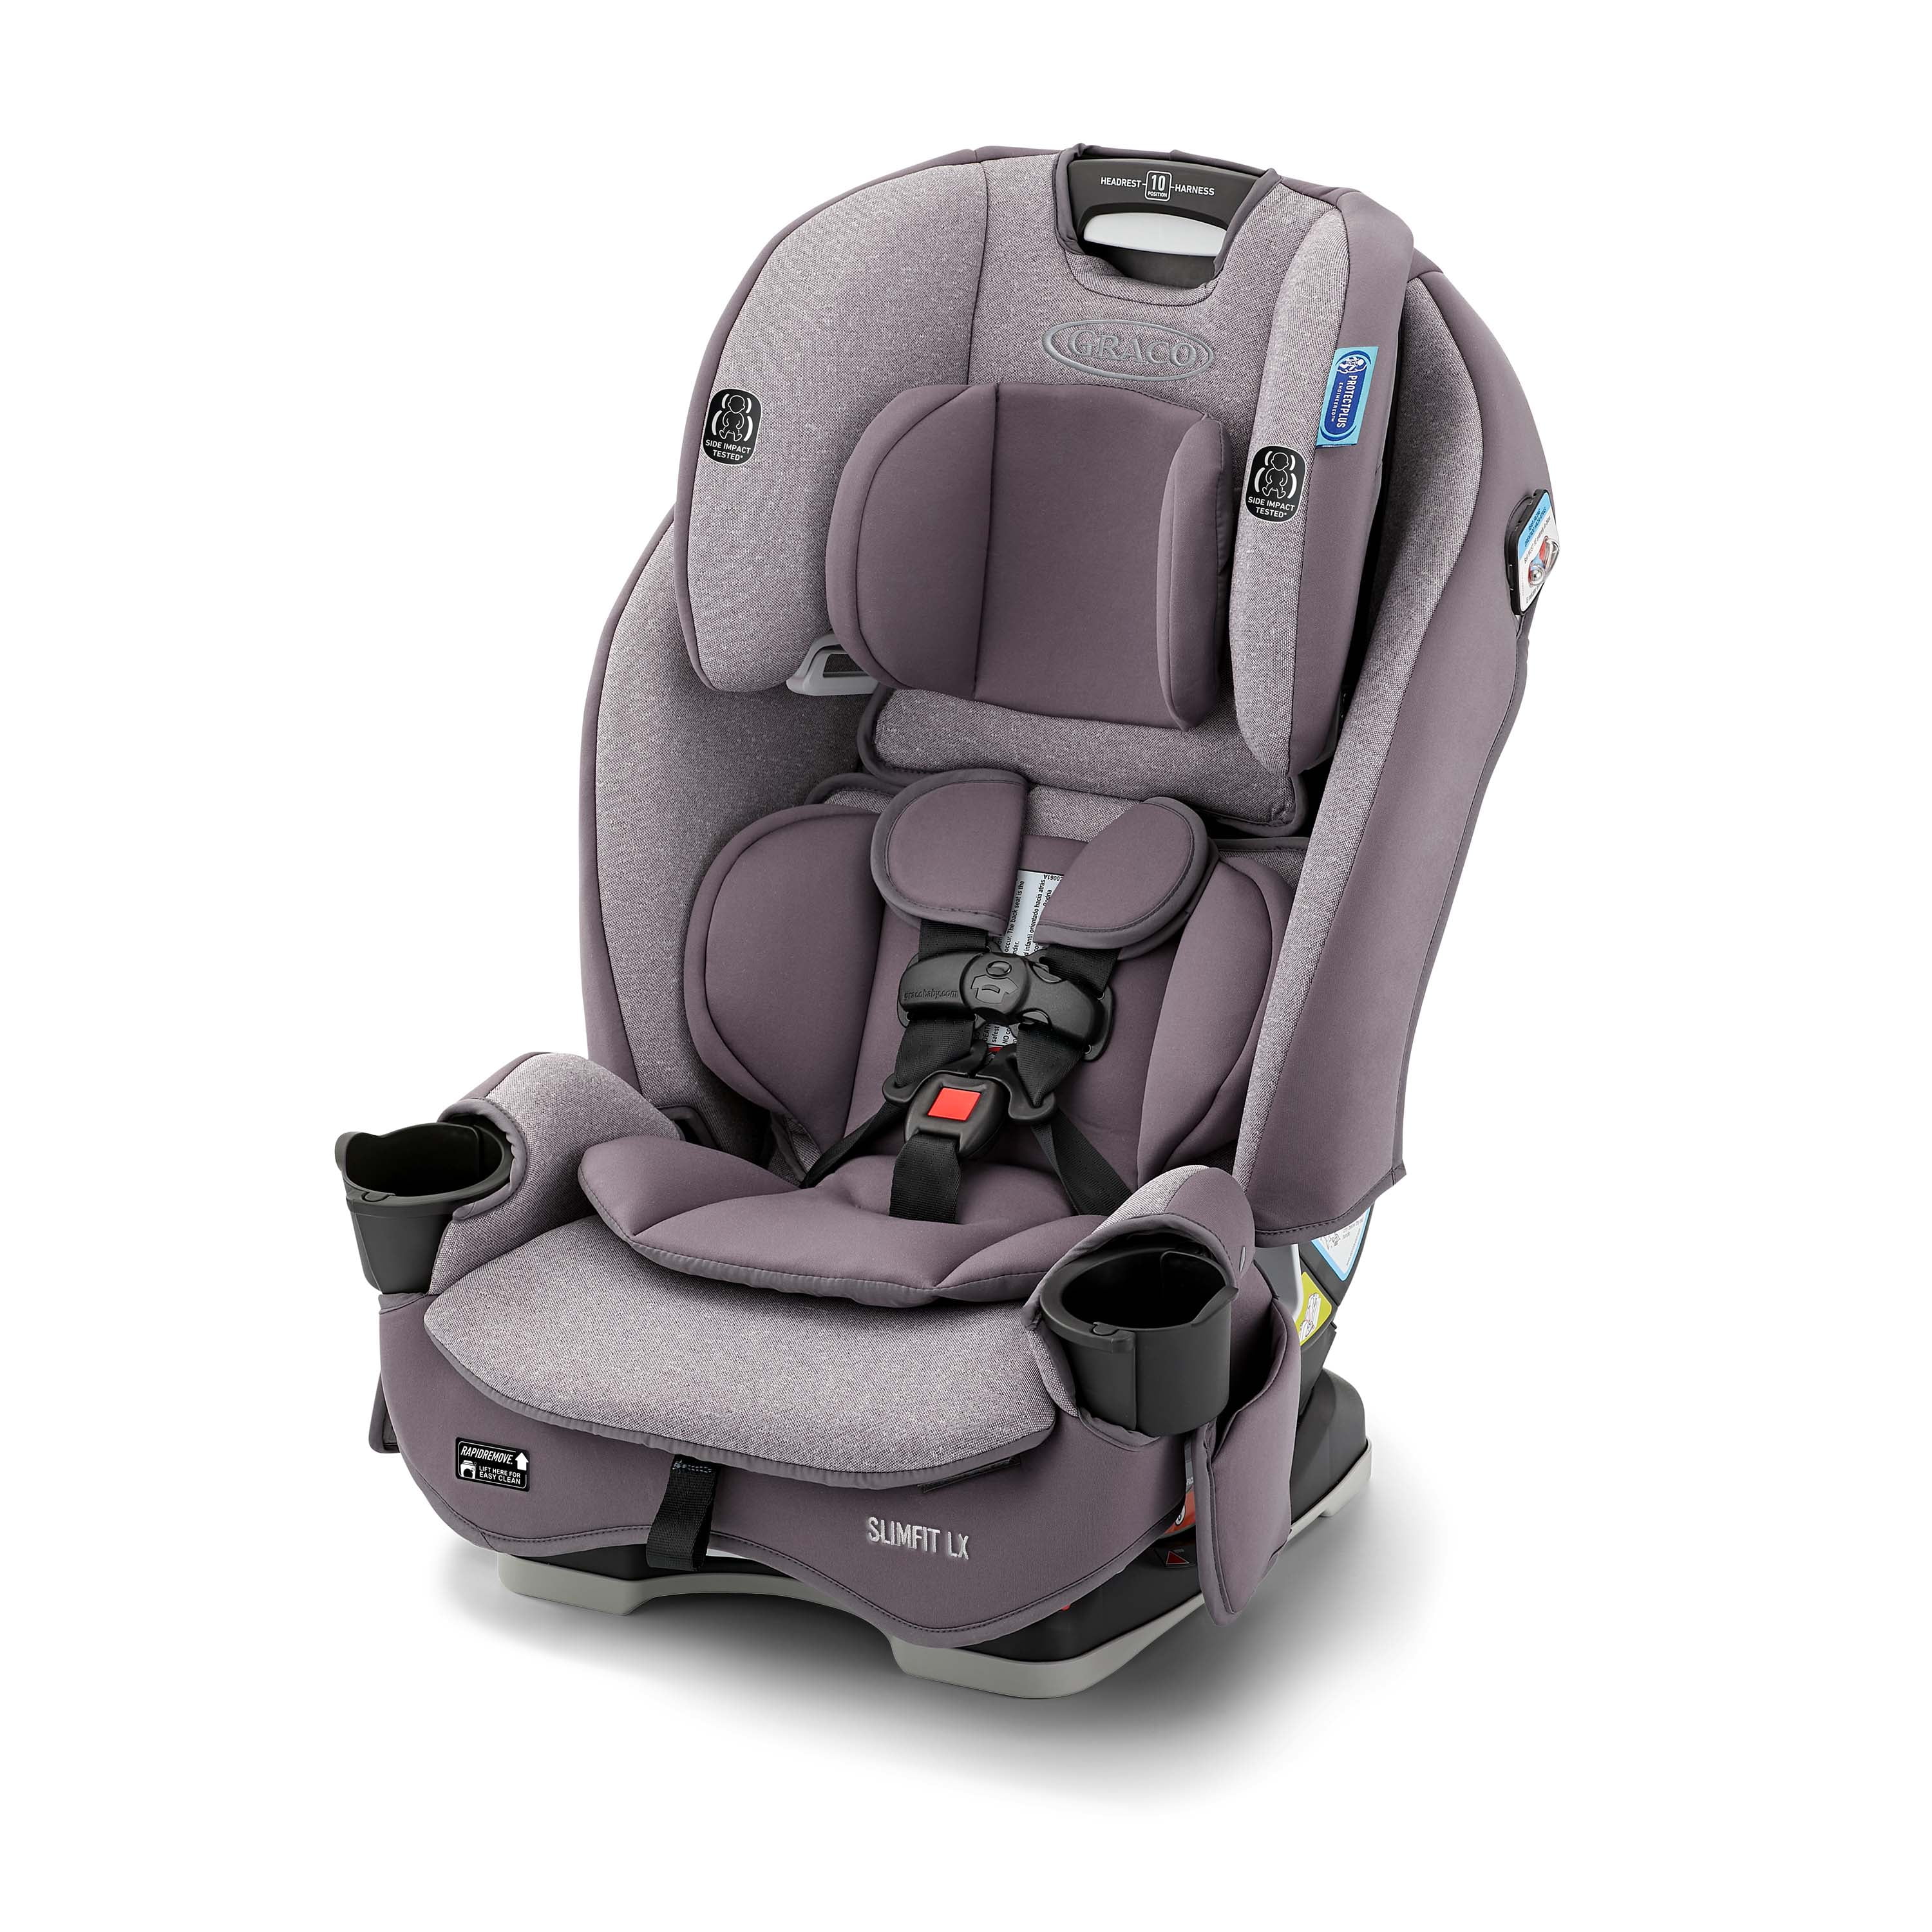 Graco Slimfit LX 3-in-1 Convertible Car Seat, Lilac